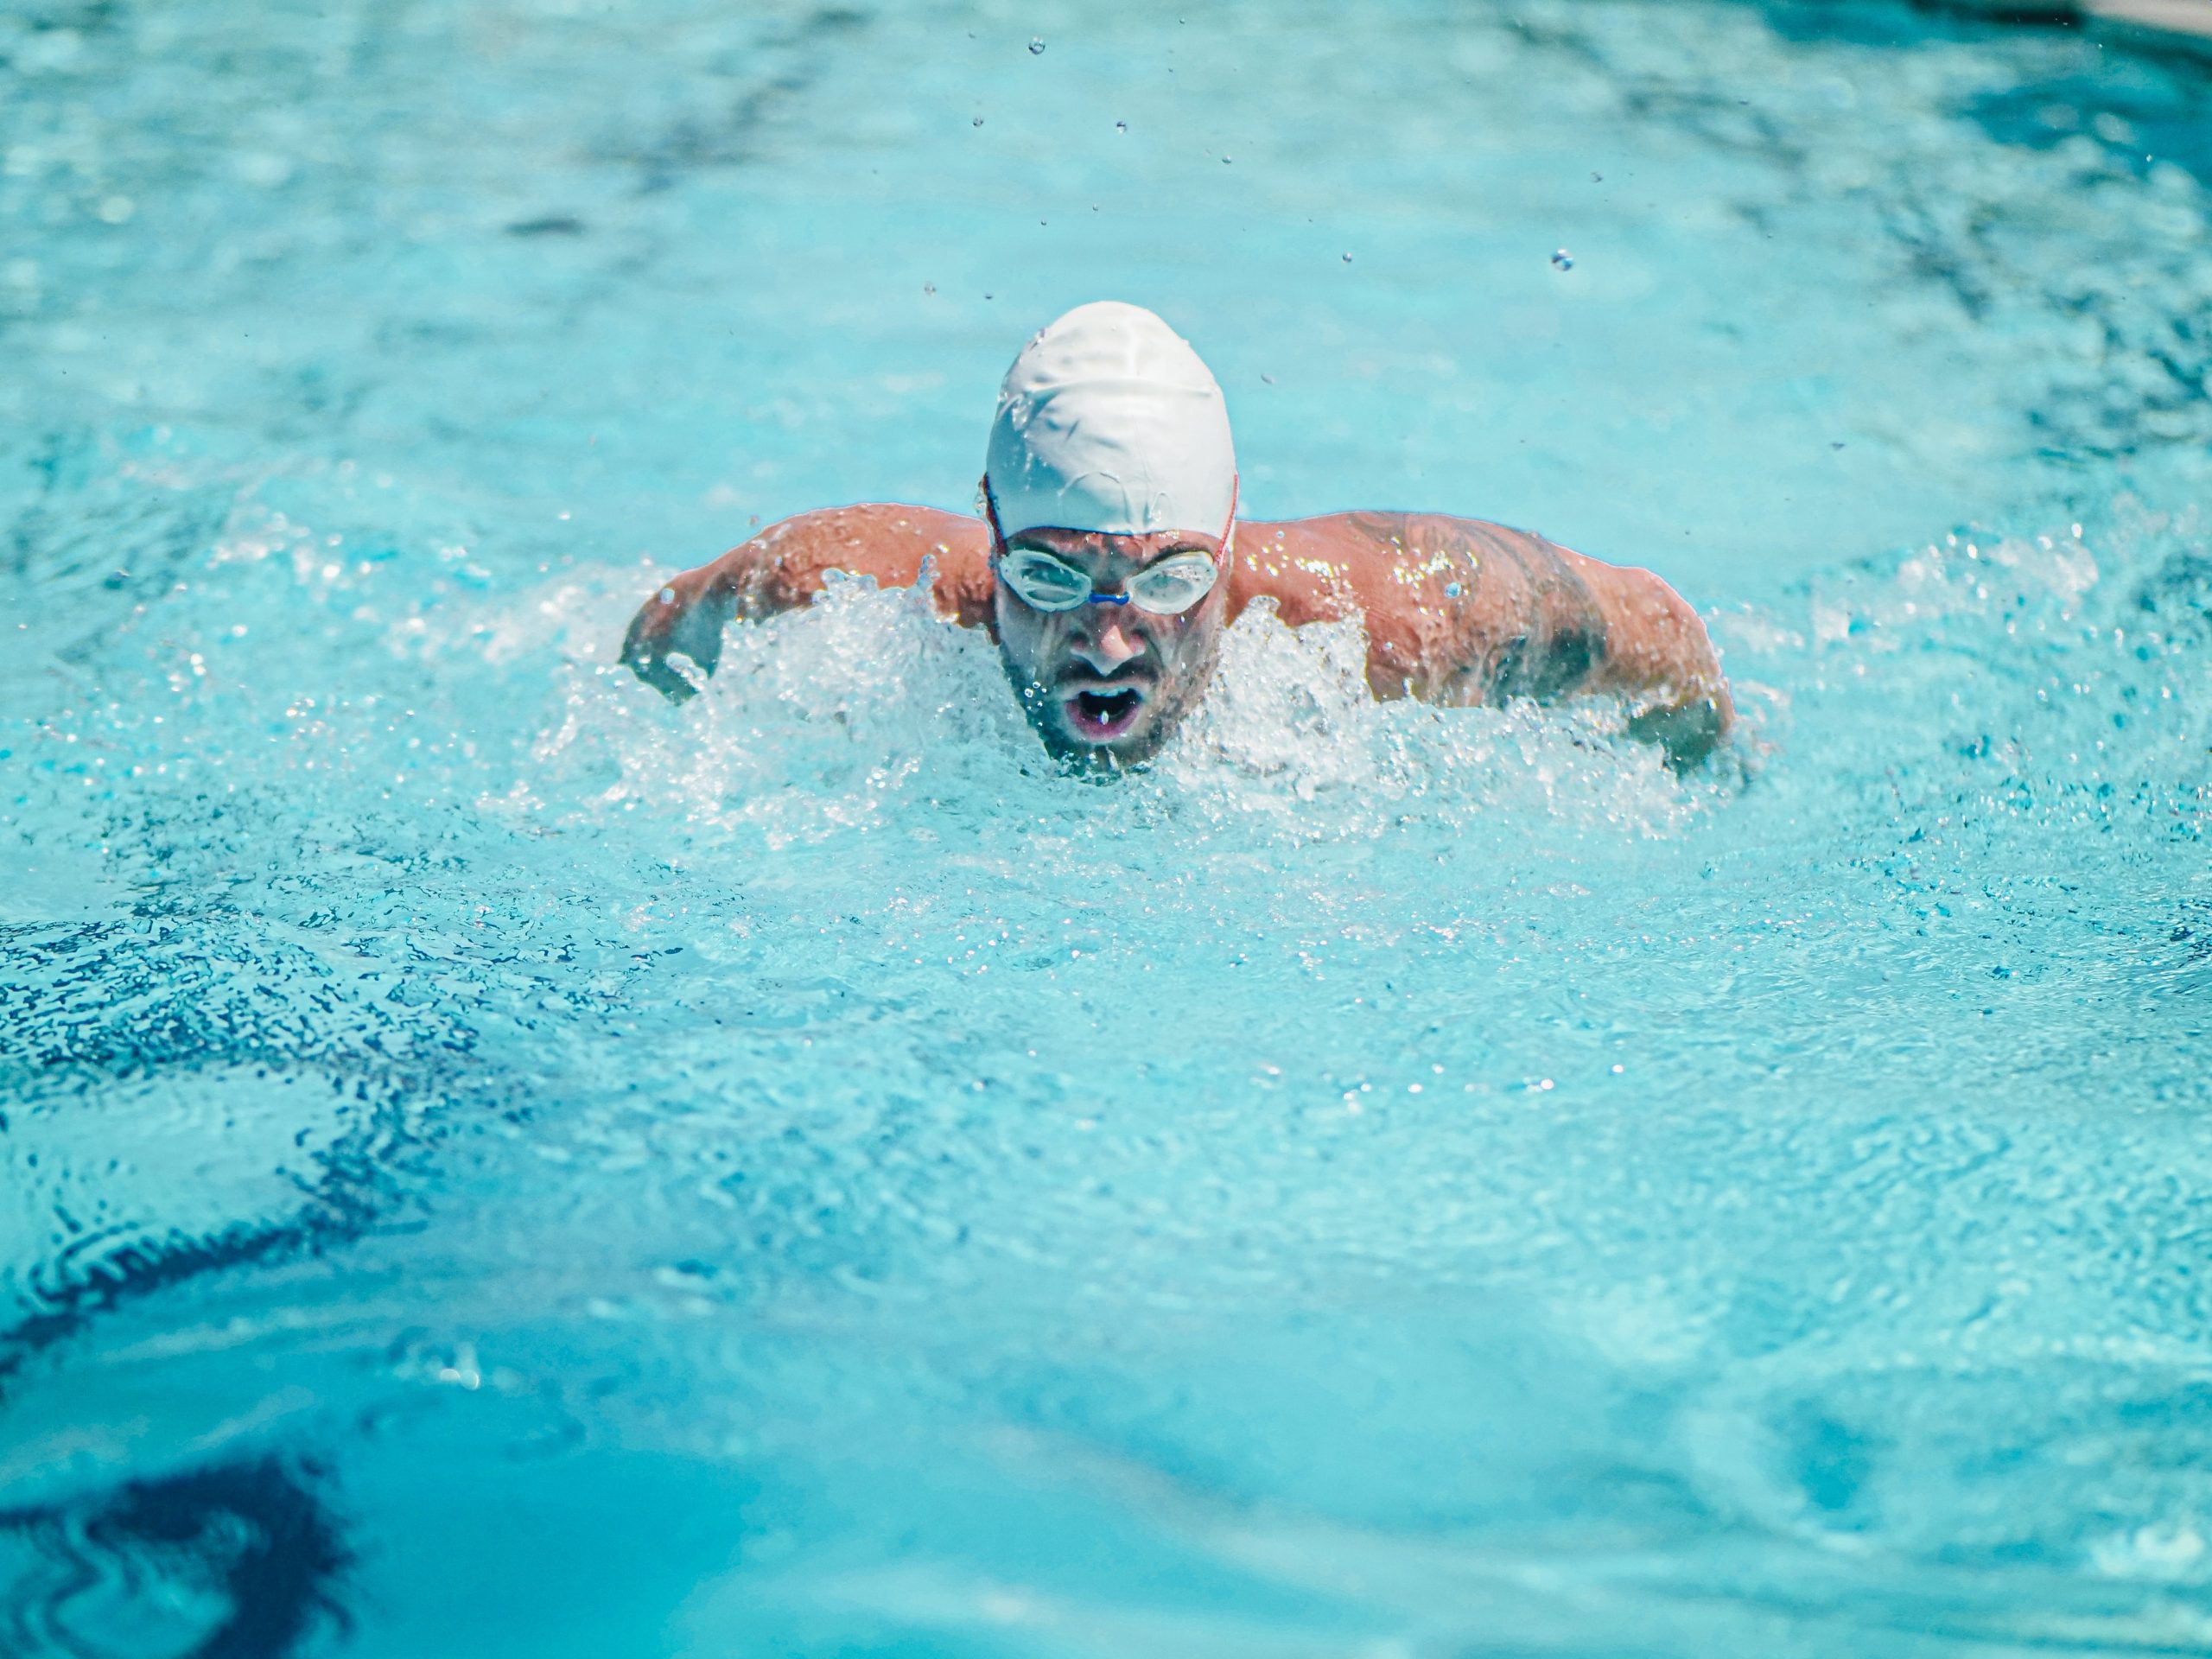 How to Swim Like a Pro and Look Good Doing It - Tips and Tricks from a Successful Swimmer!